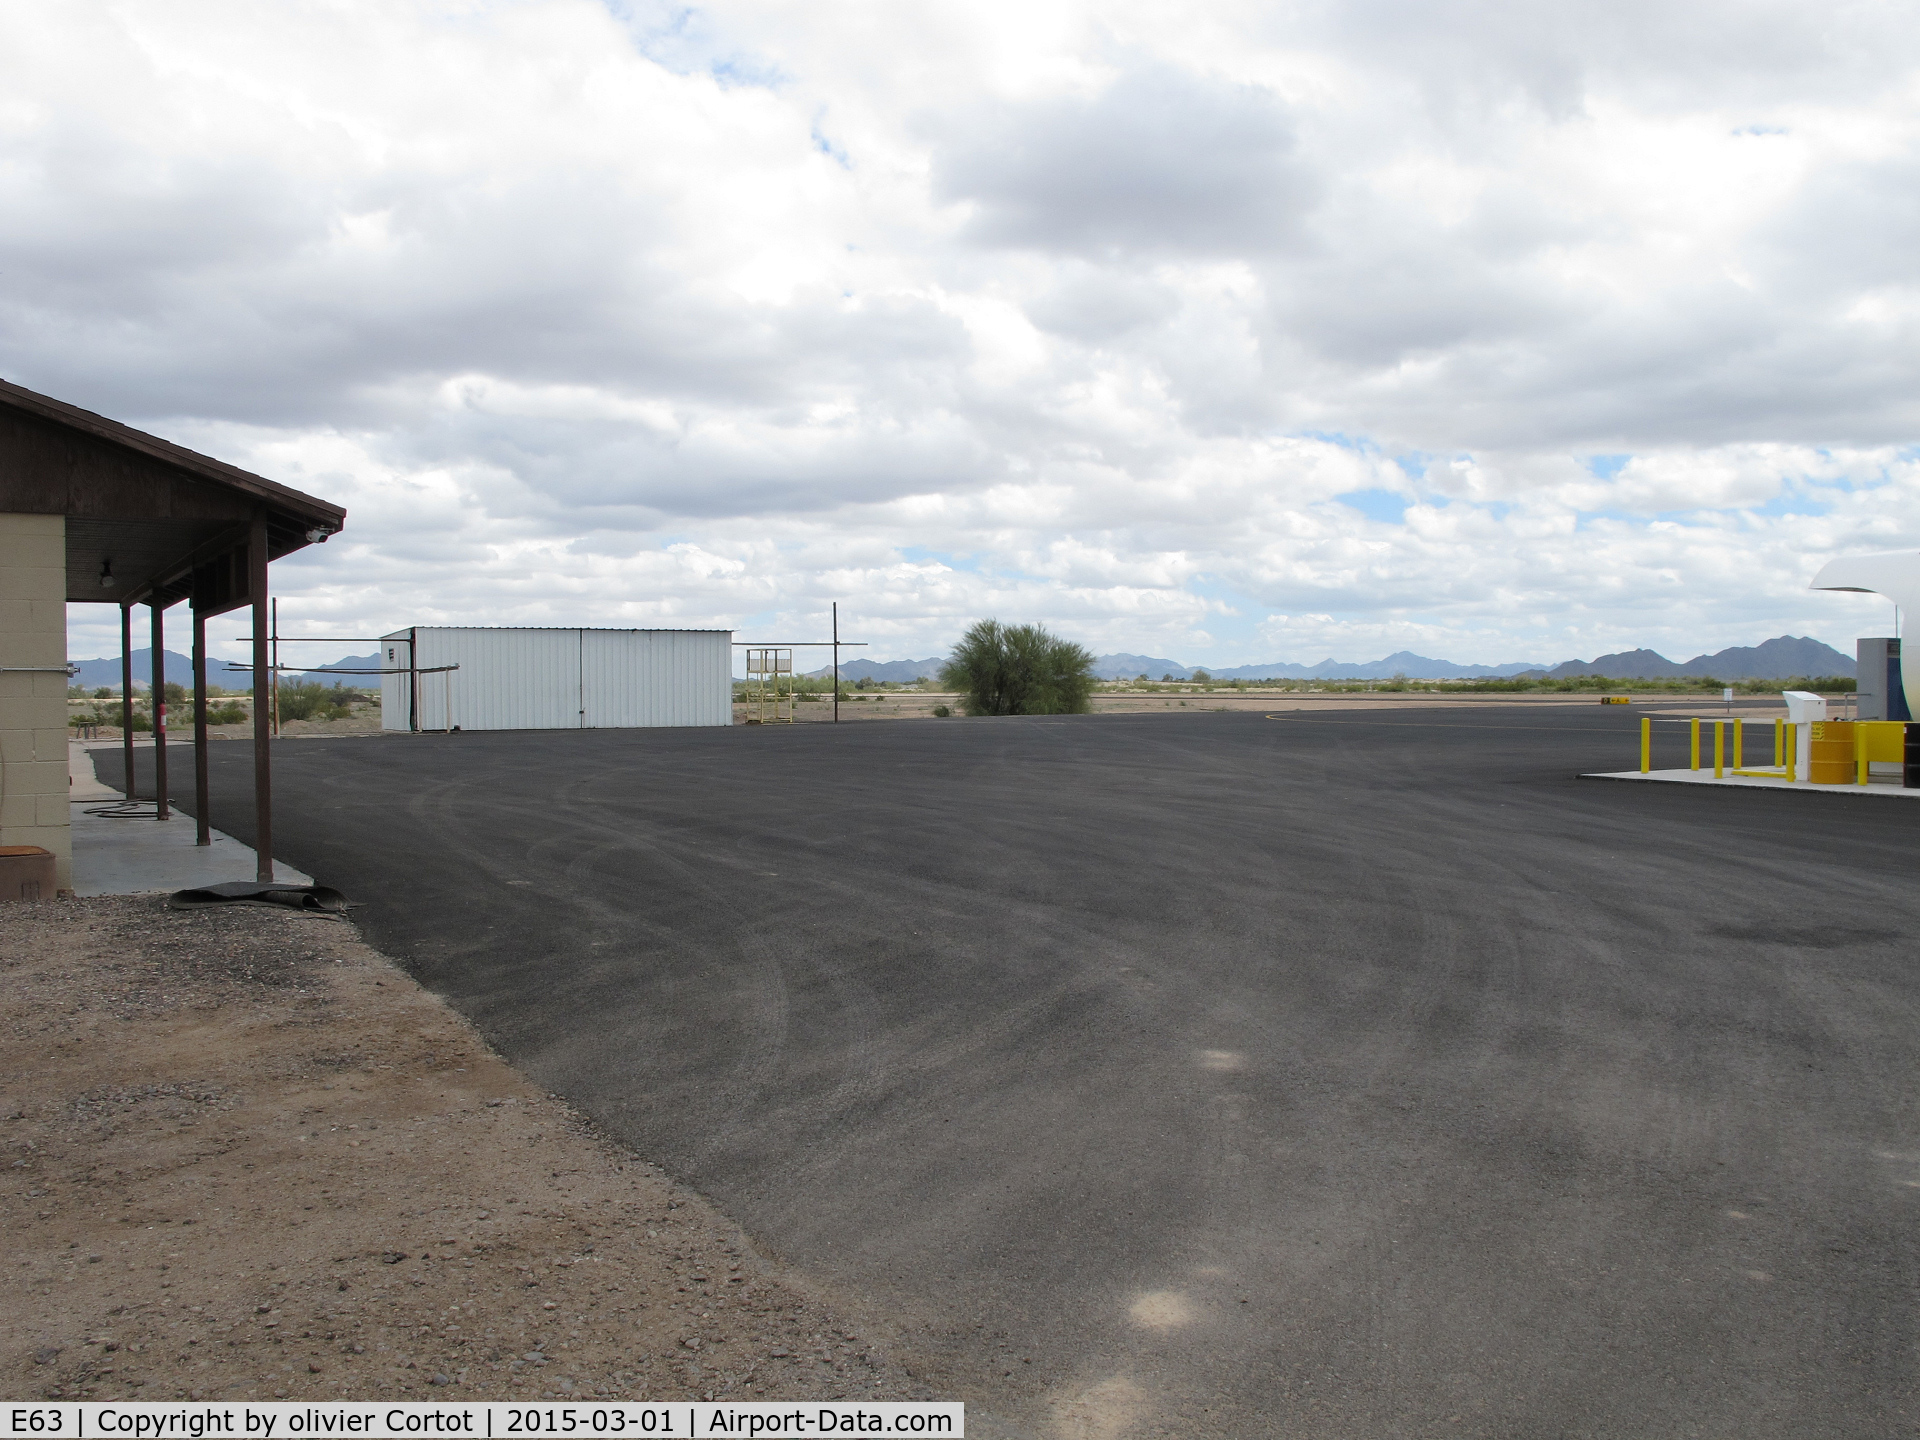 Gila Bend Municipal Airport (E63) - no aircraft in sight the day of my visit